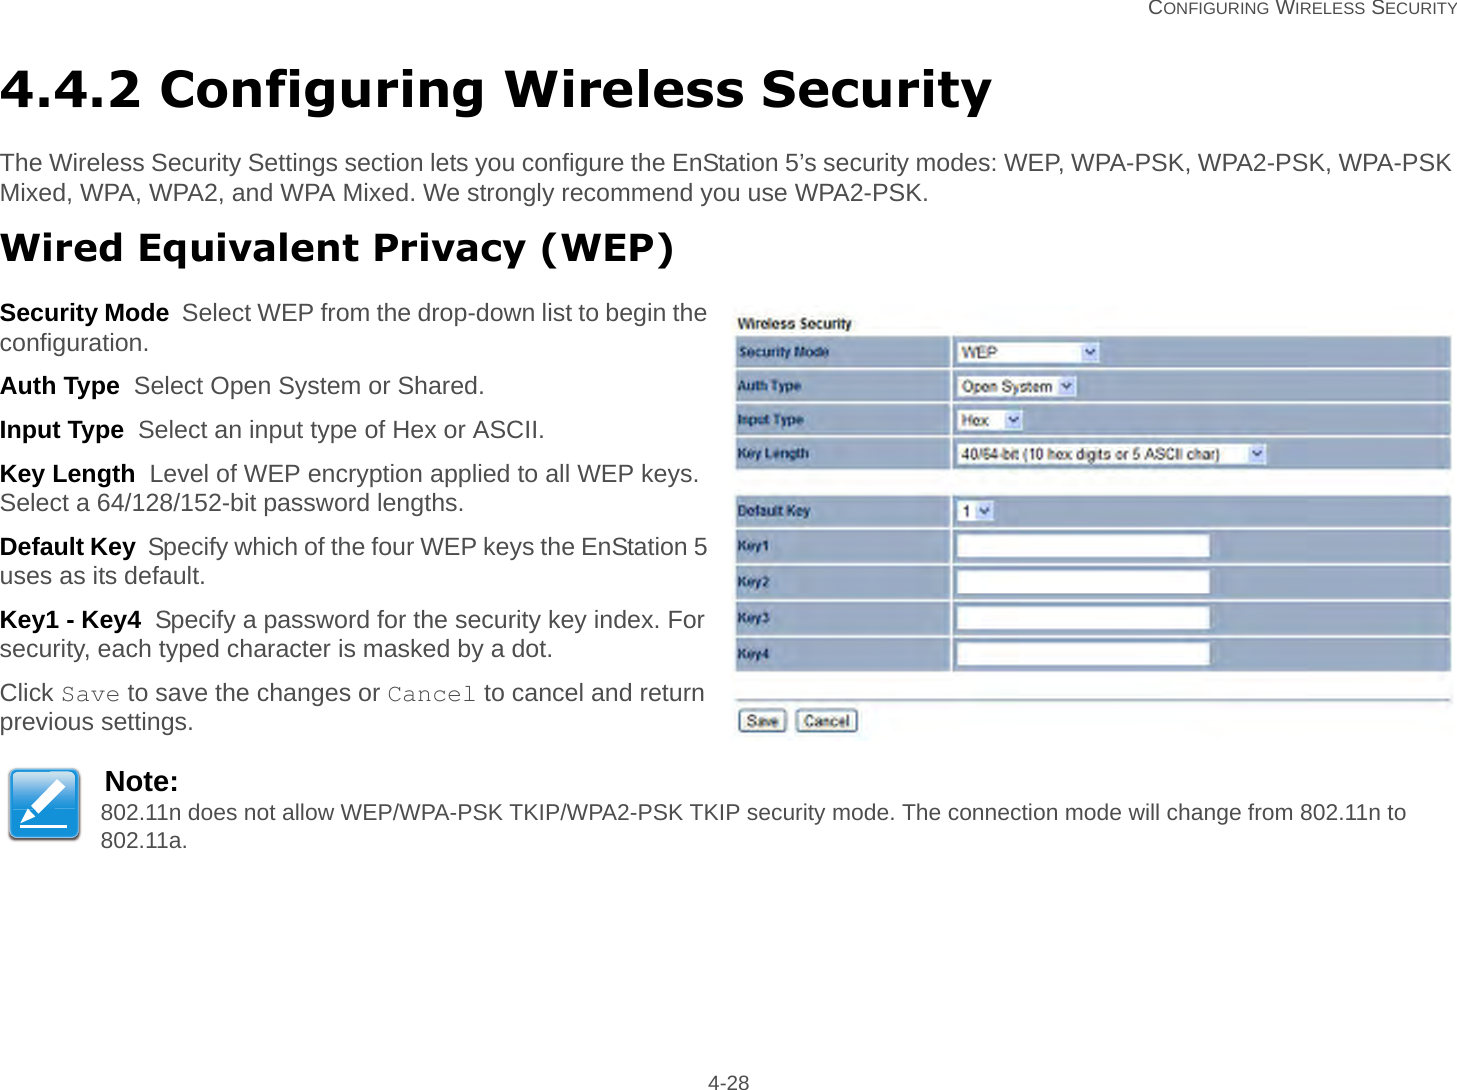   CONFIGURING WIRELESS SECURITY 4-284.4.2 Configuring Wireless SecurityThe Wireless Security Settings section lets you configure the EnStation 5’s security modes: WEP, WPA-PSK, WPA2-PSK, WPA-PSK Mixed, WPA, WPA2, and WPA Mixed. We strongly recommend you use WPA2-PSK.Wired Equivalent Privacy (WEP)Security Mode  Select WEP from the drop-down list to begin the configuration.Auth Type  Select Open System or Shared.Input Type  Select an input type of Hex or ASCII.Key Length  Level of WEP encryption applied to all WEP keys. Select a 64/128/152-bit password lengths.Default Key  Specify which of the four WEP keys the EnStation 5 uses as its default.Key1 - Key4  Specify a password for the security key index. For security, each typed character is masked by a dot.Click Save to save the changes or Cancel to cancel and return previous settings.Note:802.11n does not allow WEP/WPA-PSK TKIP/WPA2-PSK TKIP security mode. The connection mode will change from 802.11n to 802.11a.